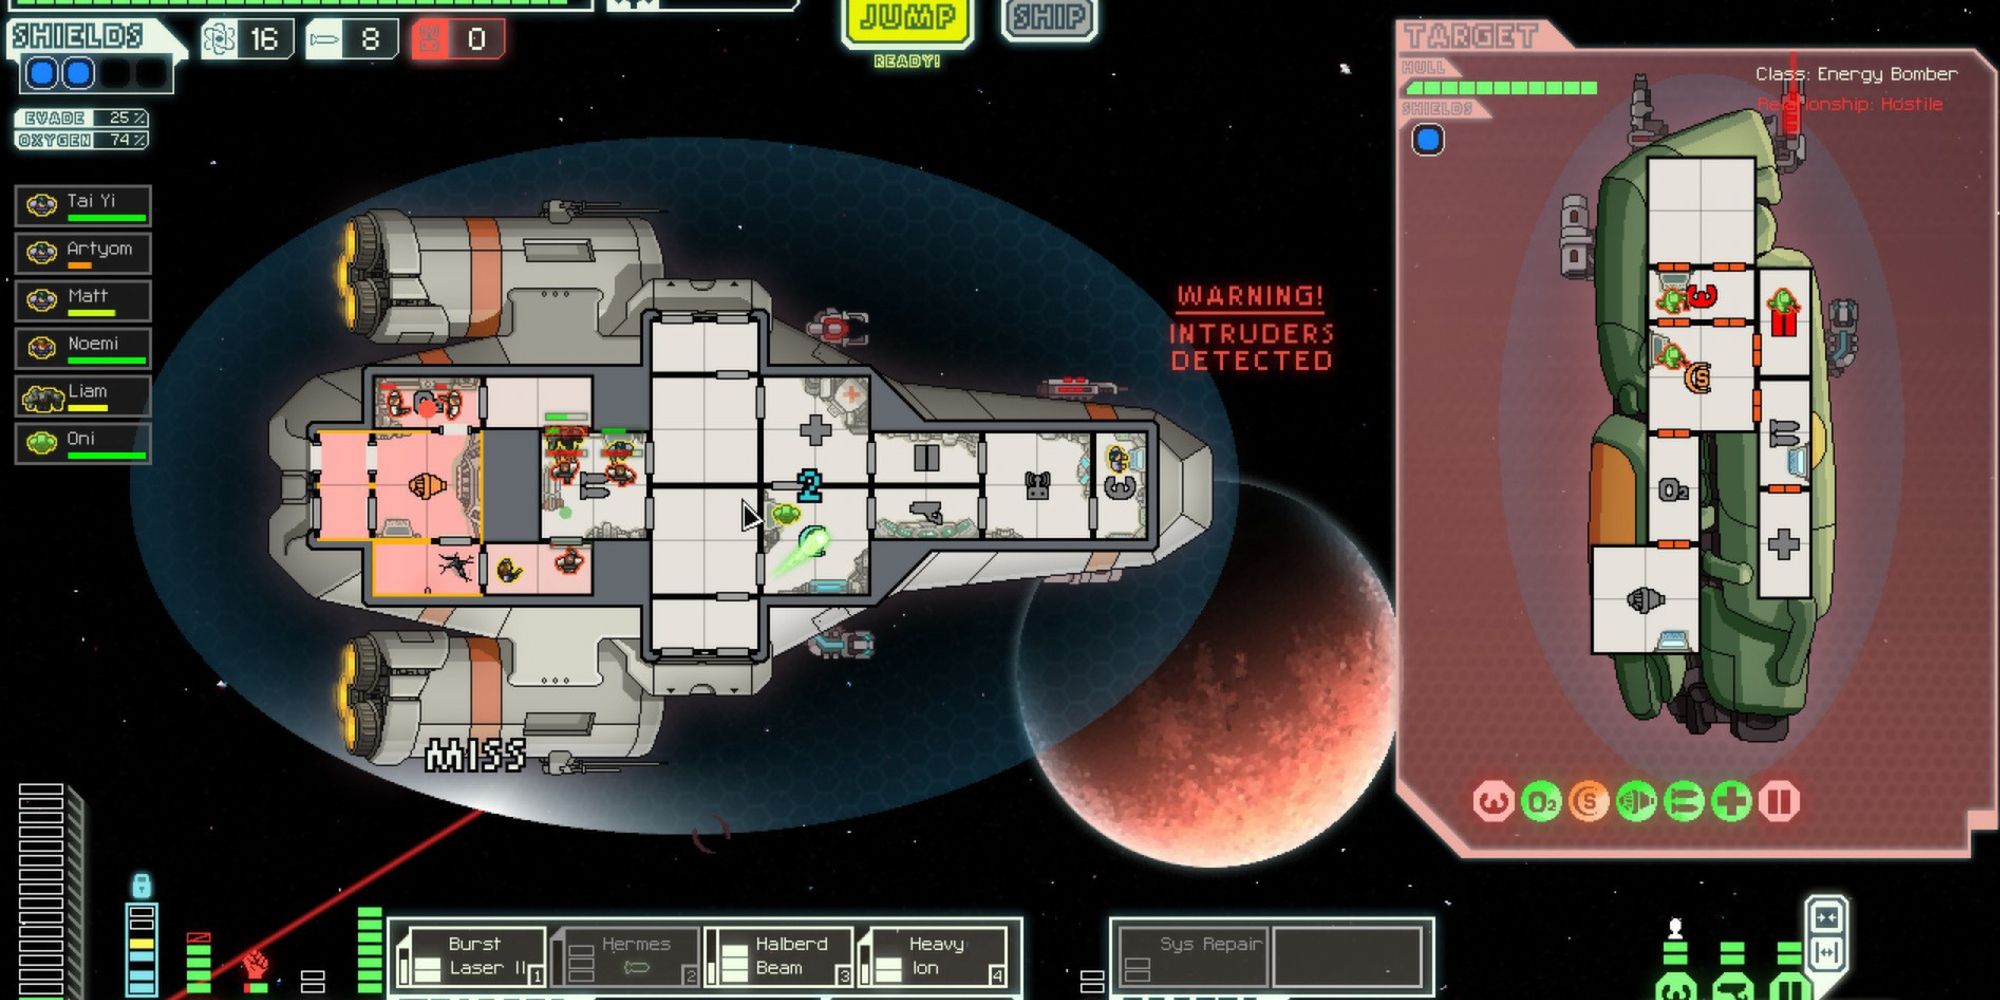 Ship overview showing intruders in FTL Faster Than Light